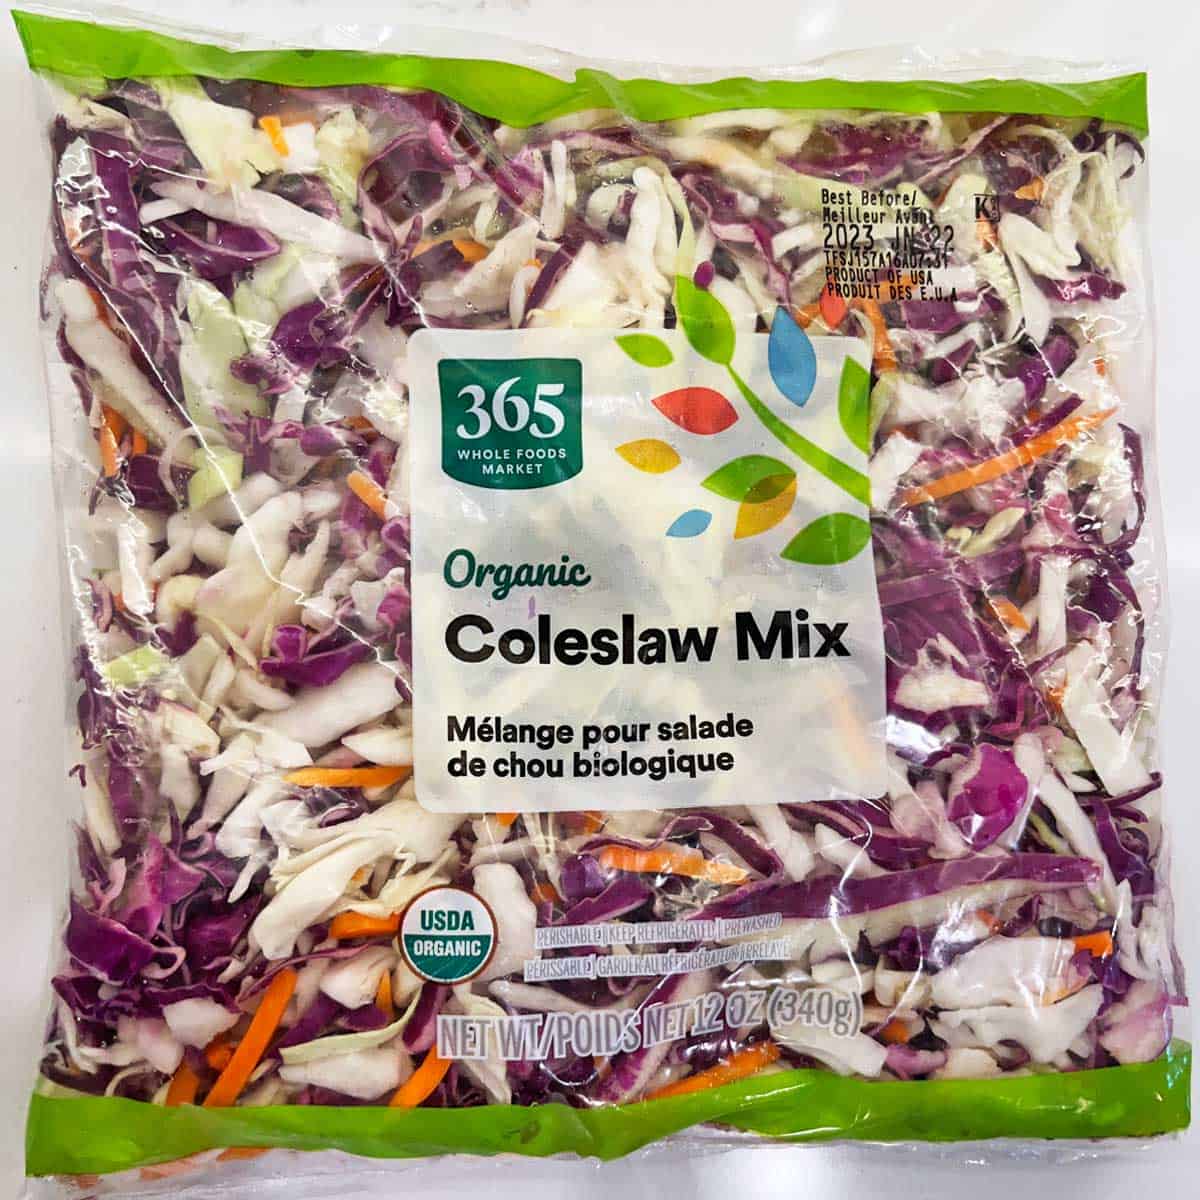 A bag of coleslaw mix from Whole Foods Market. 